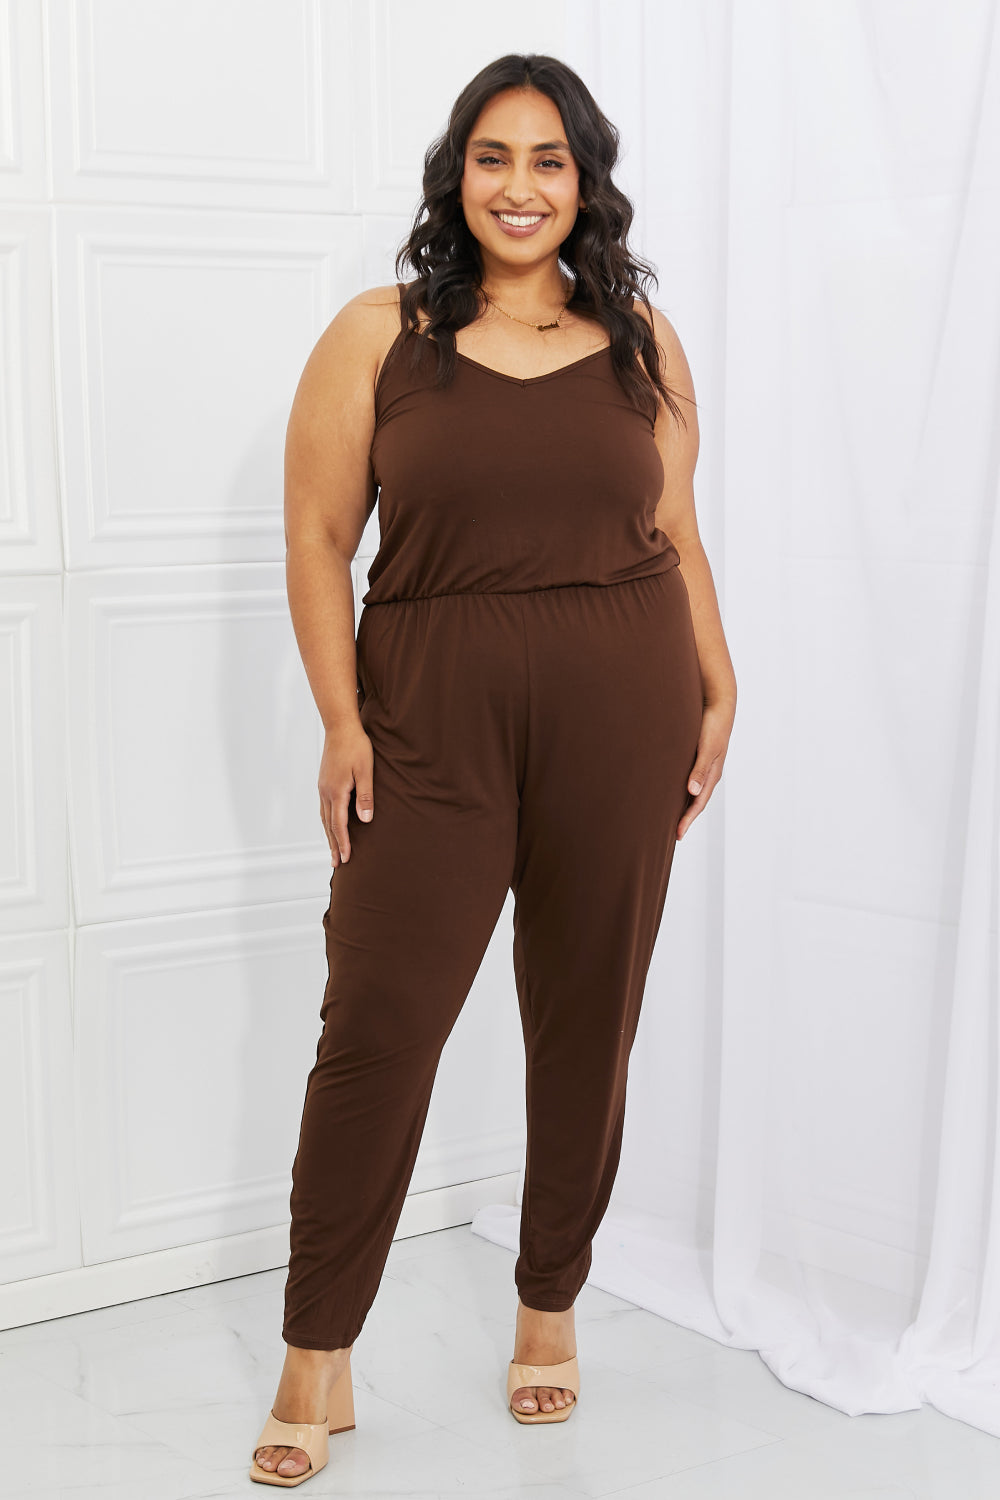 Capella Comfy Casual Plus Size Solid Elastic Waistband Jumpsuit in Chocolate Sunset and Swim   